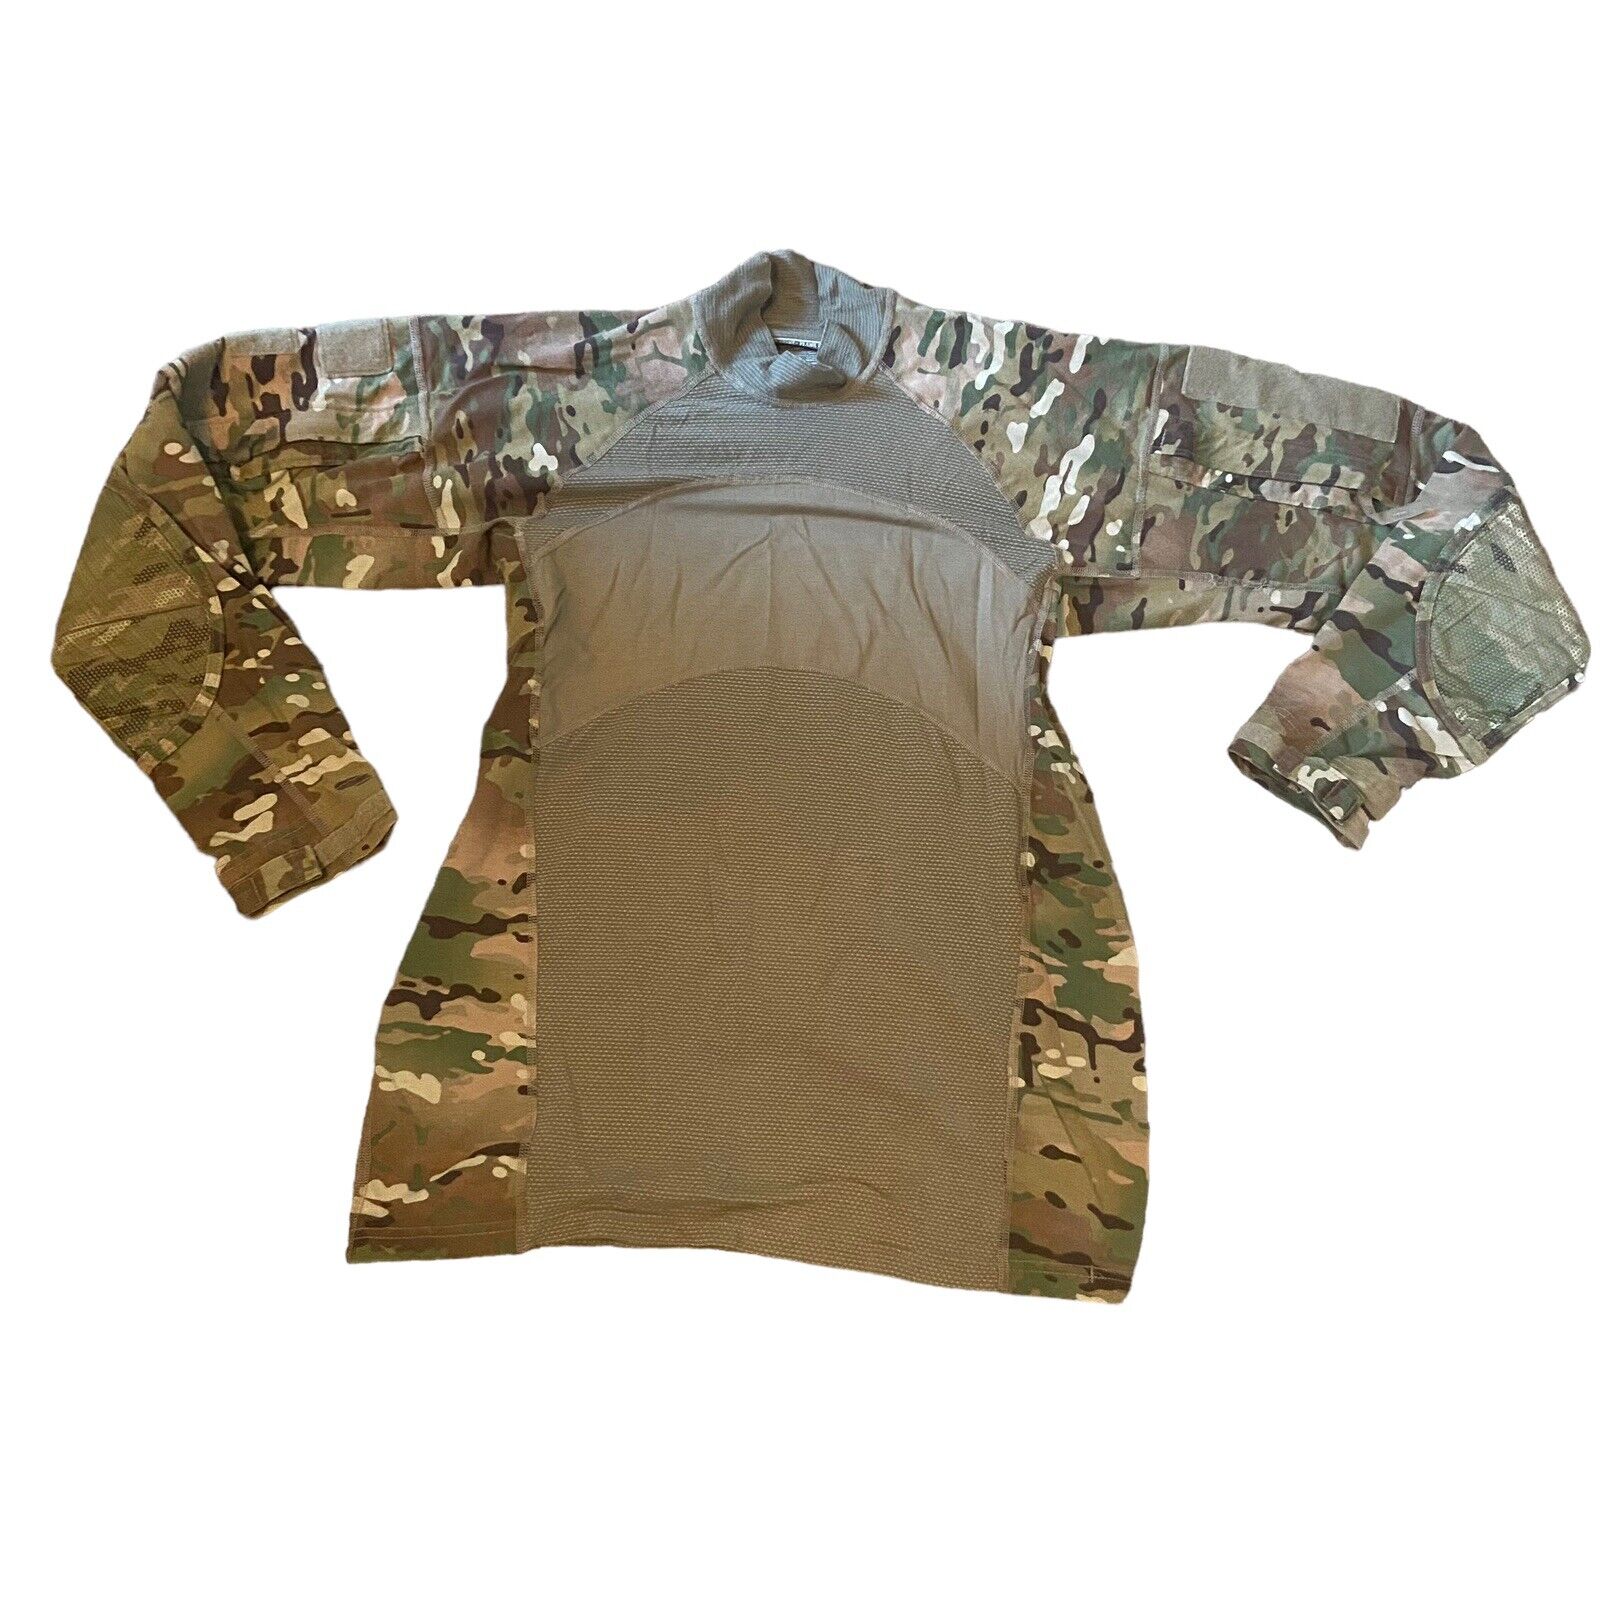 Camouflage Flame Resistant Army Combat Shirt ACS Size X-Large XL Military W911QY